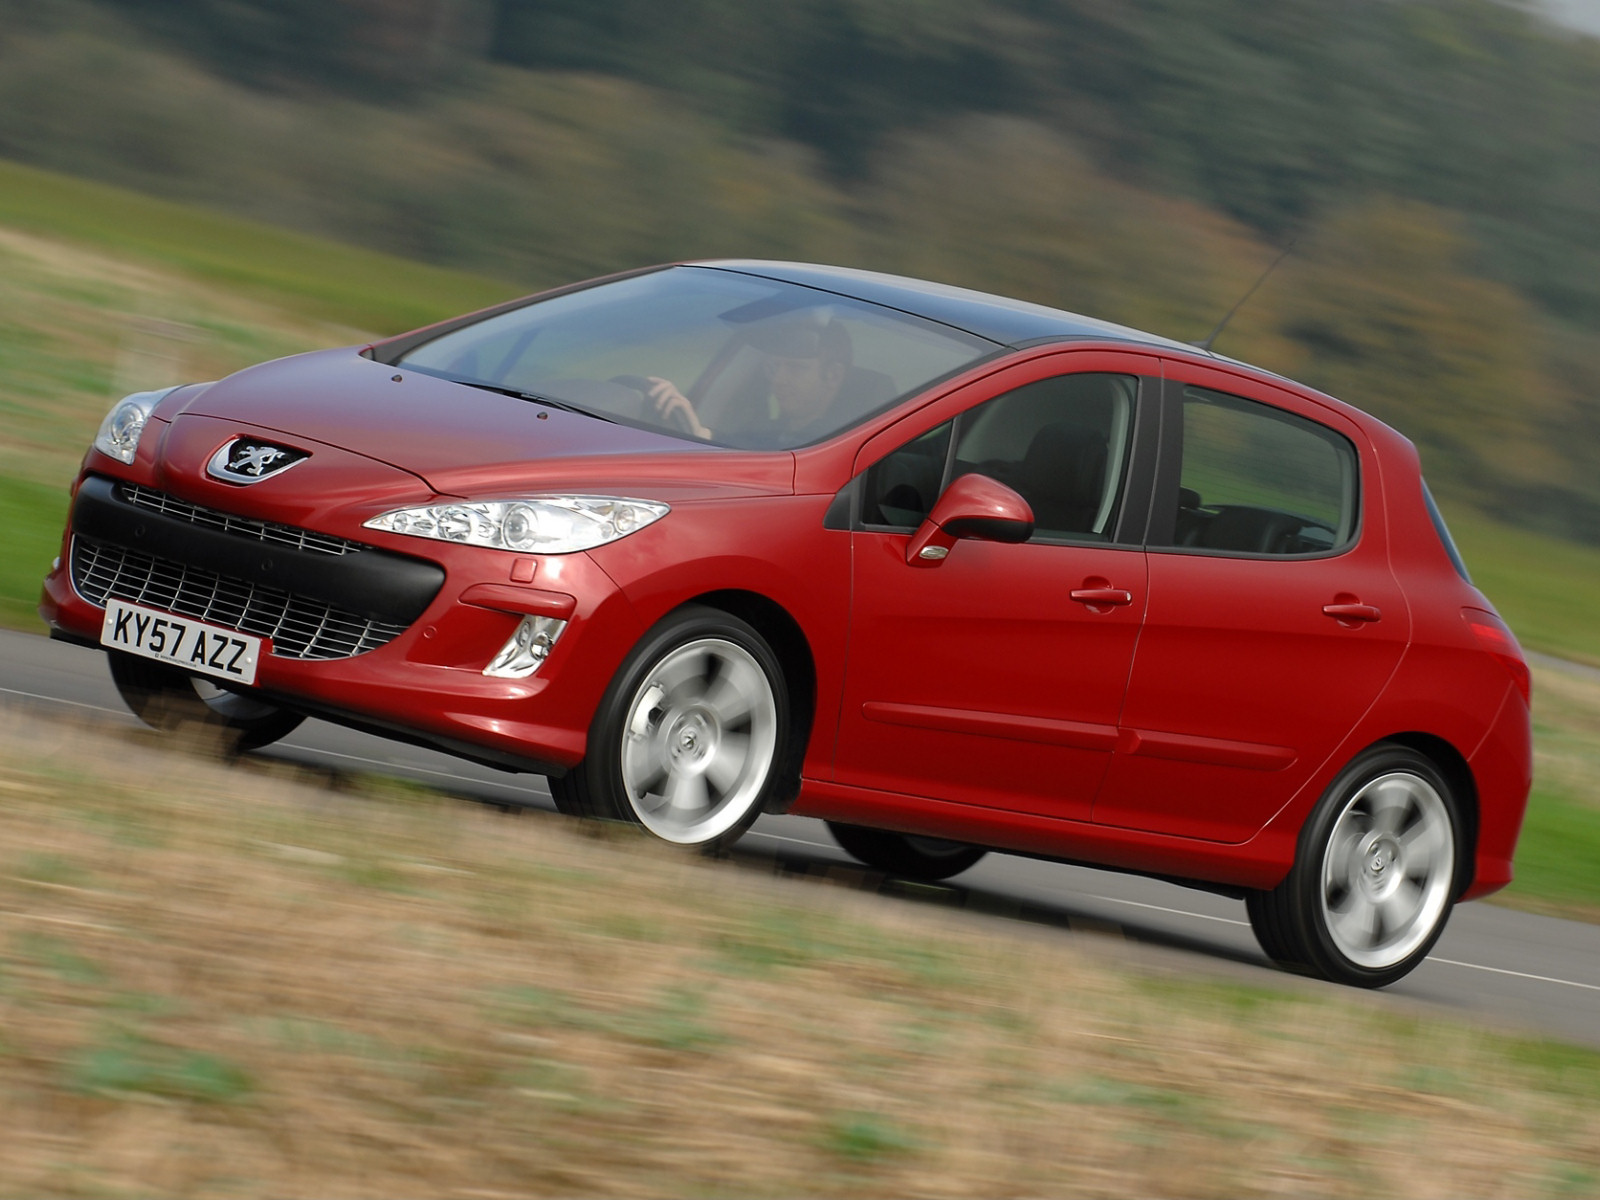 Car in pictures car photo gallery » Peugeot 308 GT 2008